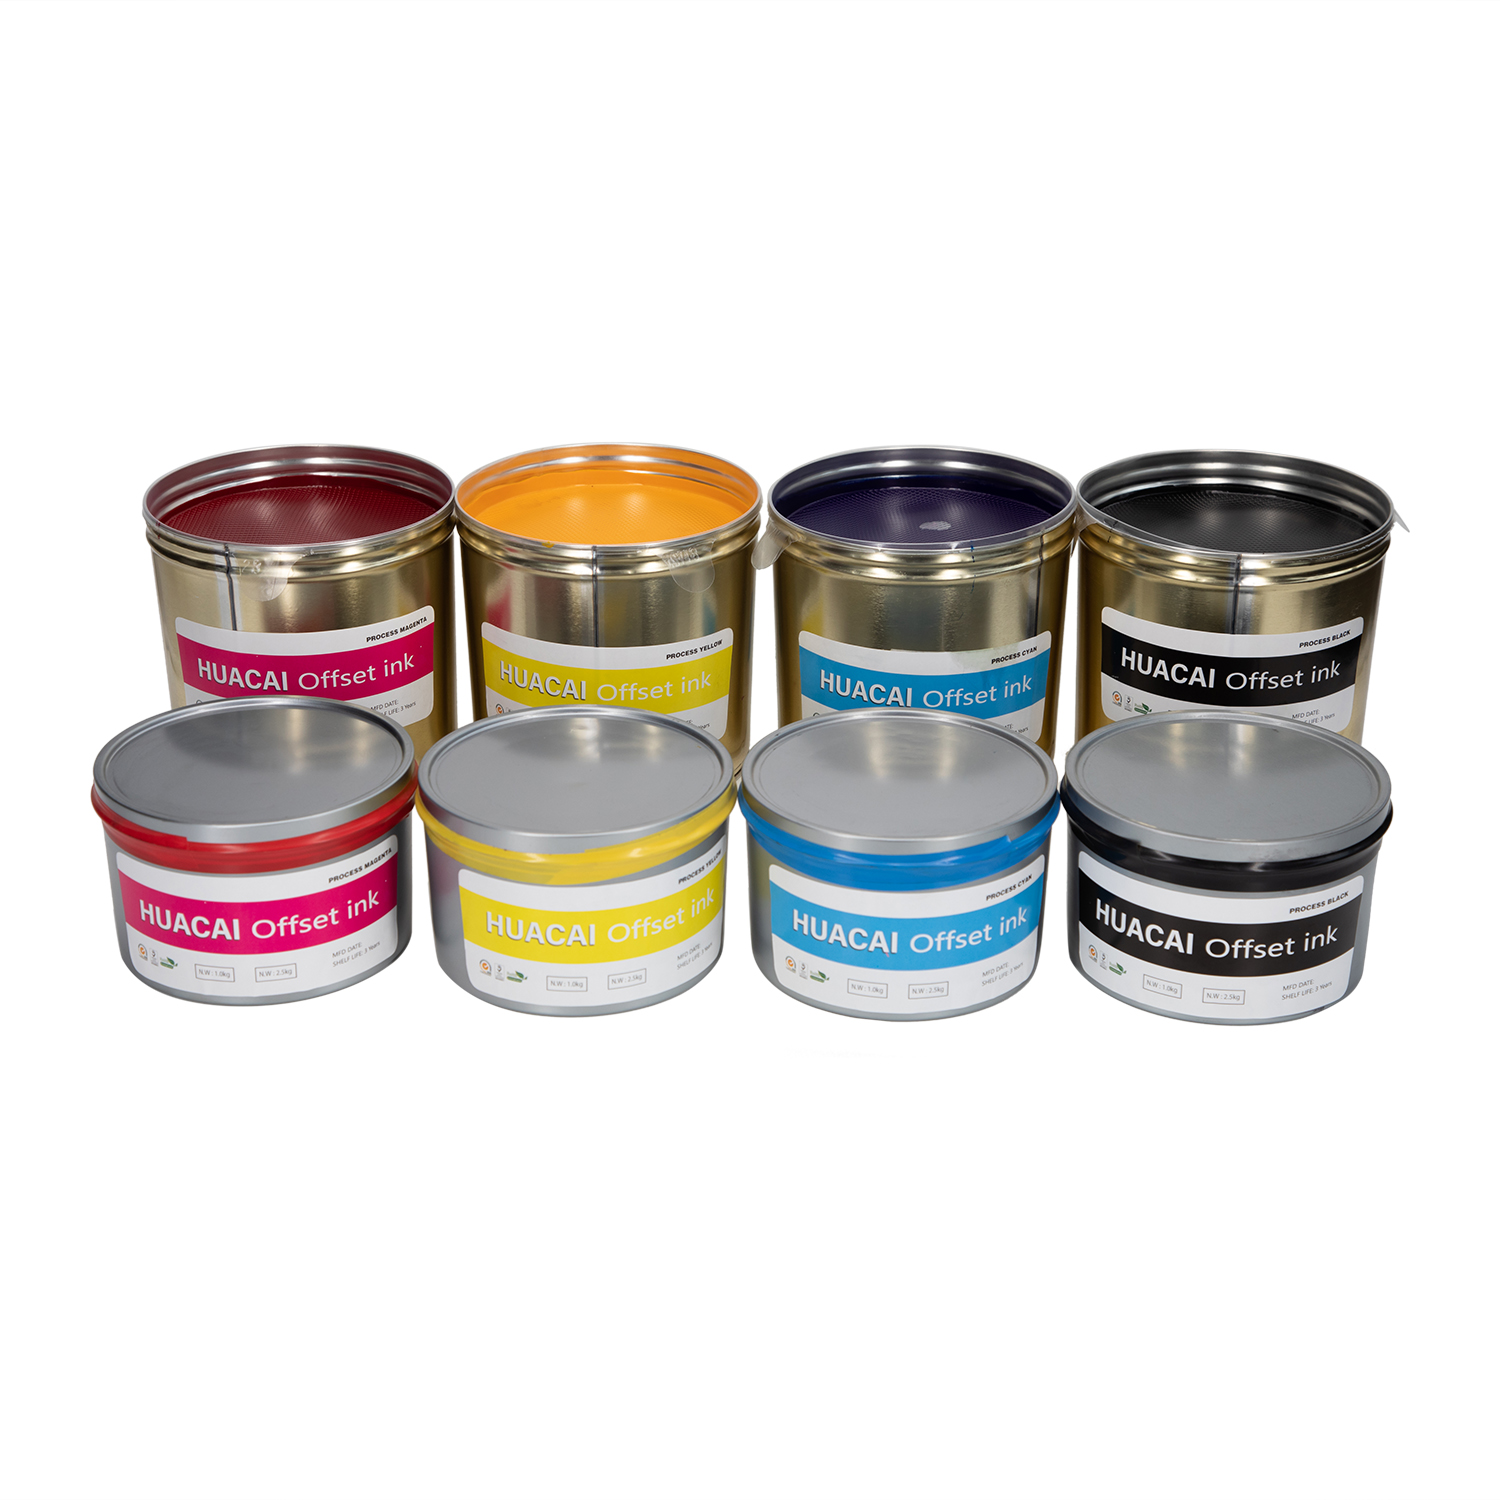 coated paper printing ink and pantone color offset printing ink